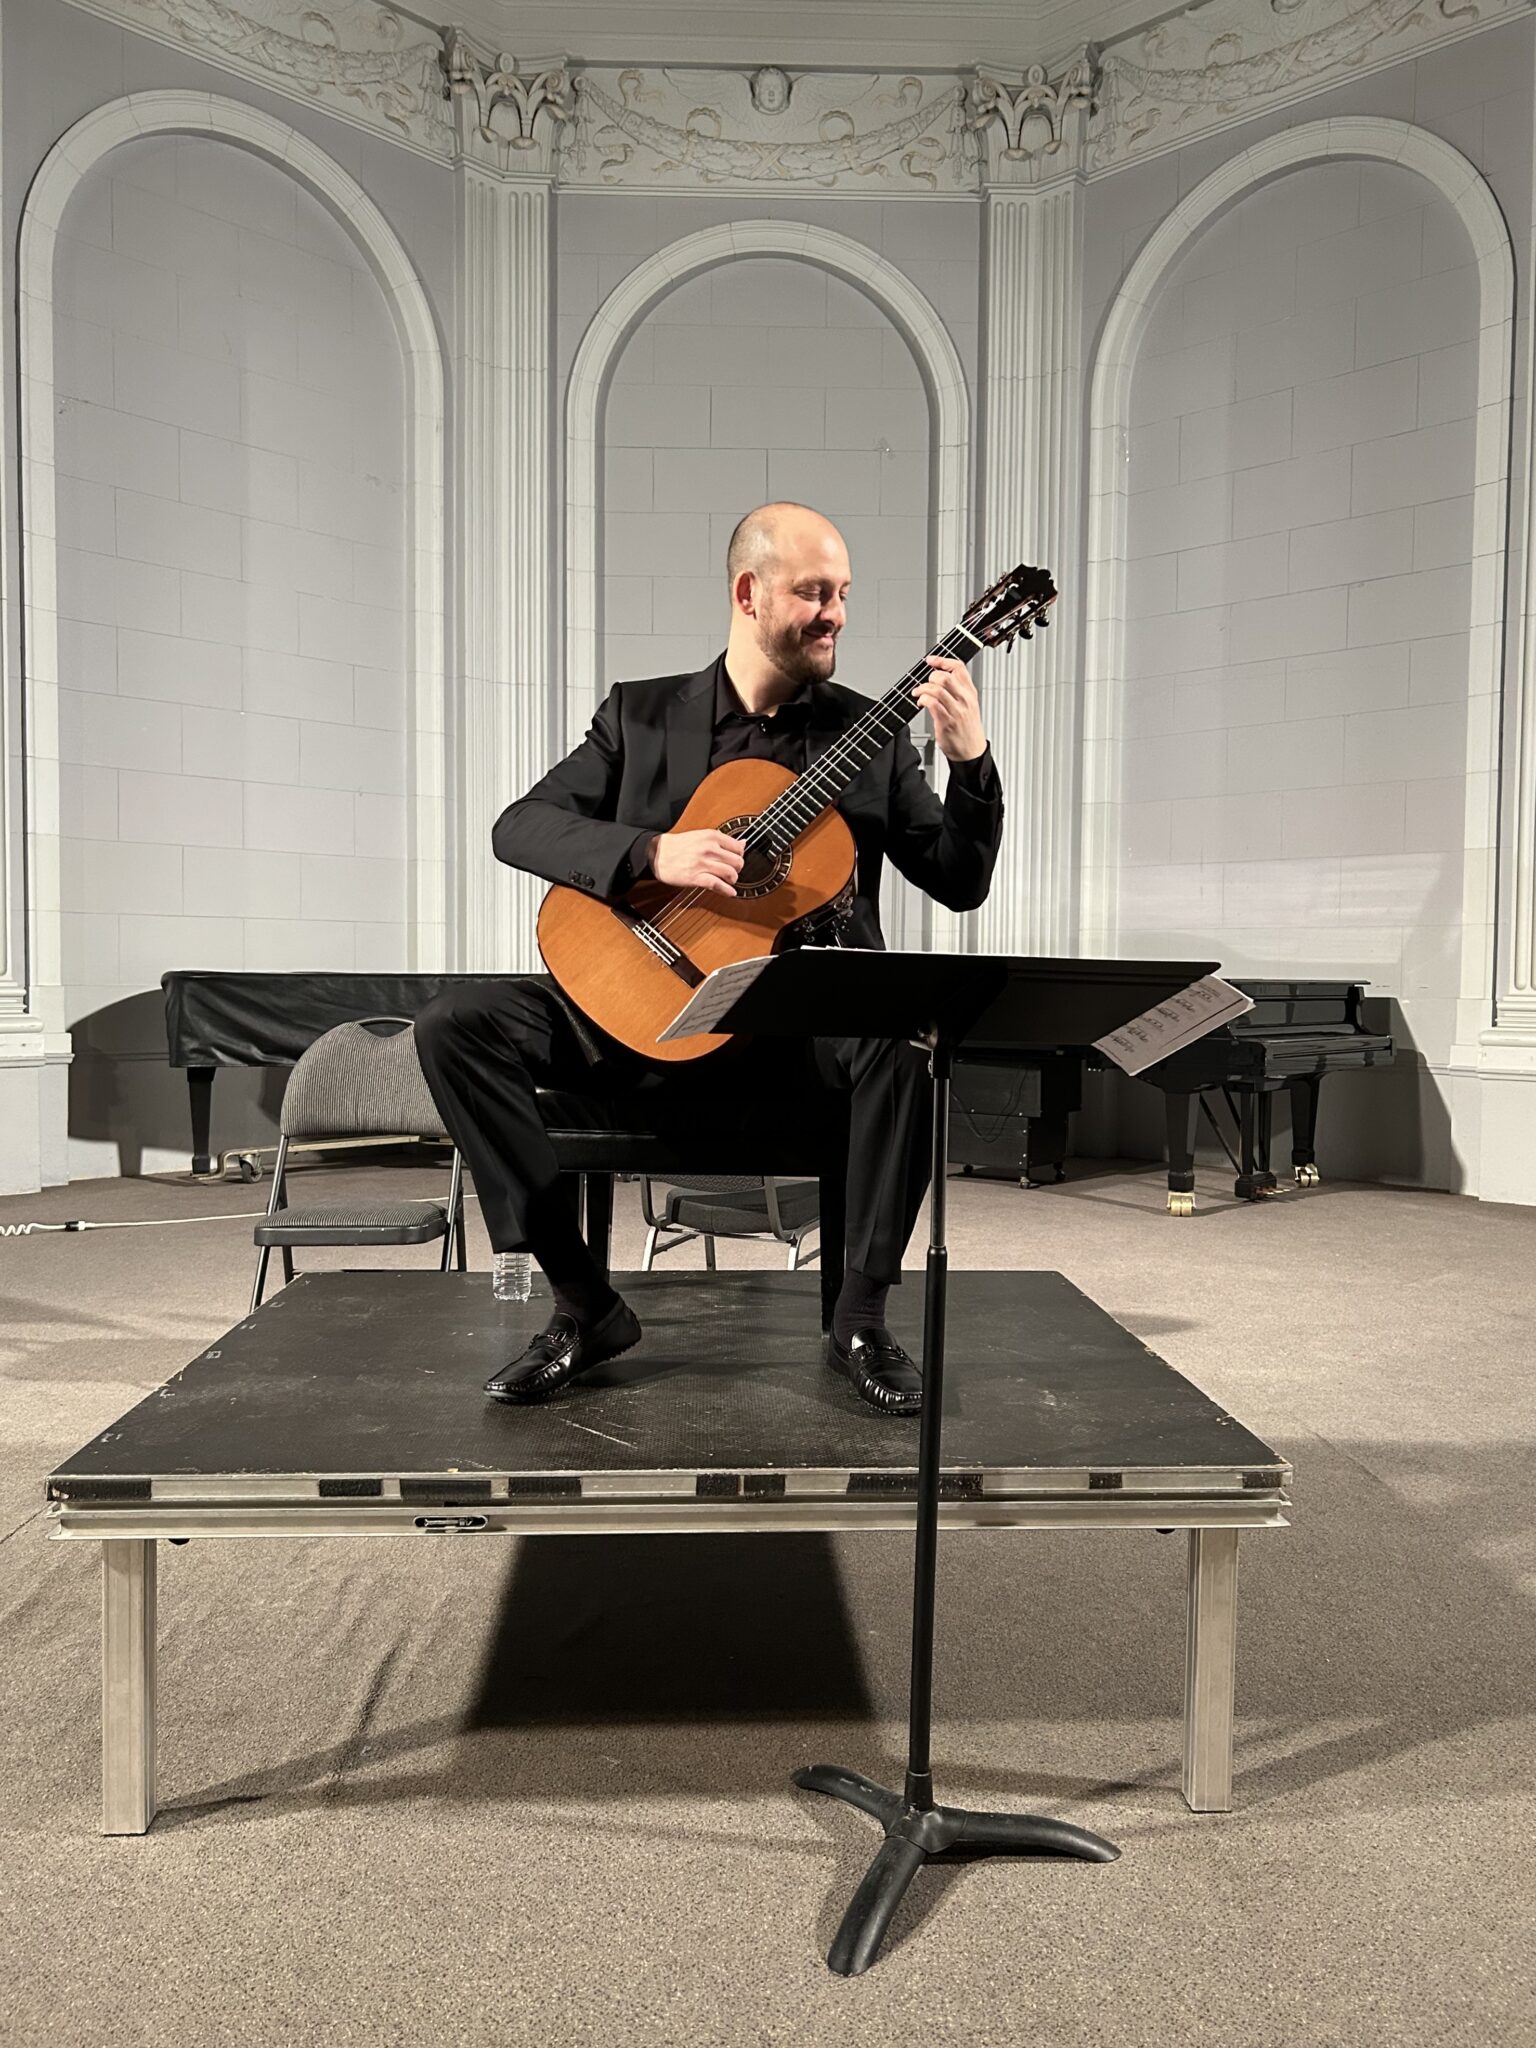 Concert Review by Patrick Roux, guitarist and composer